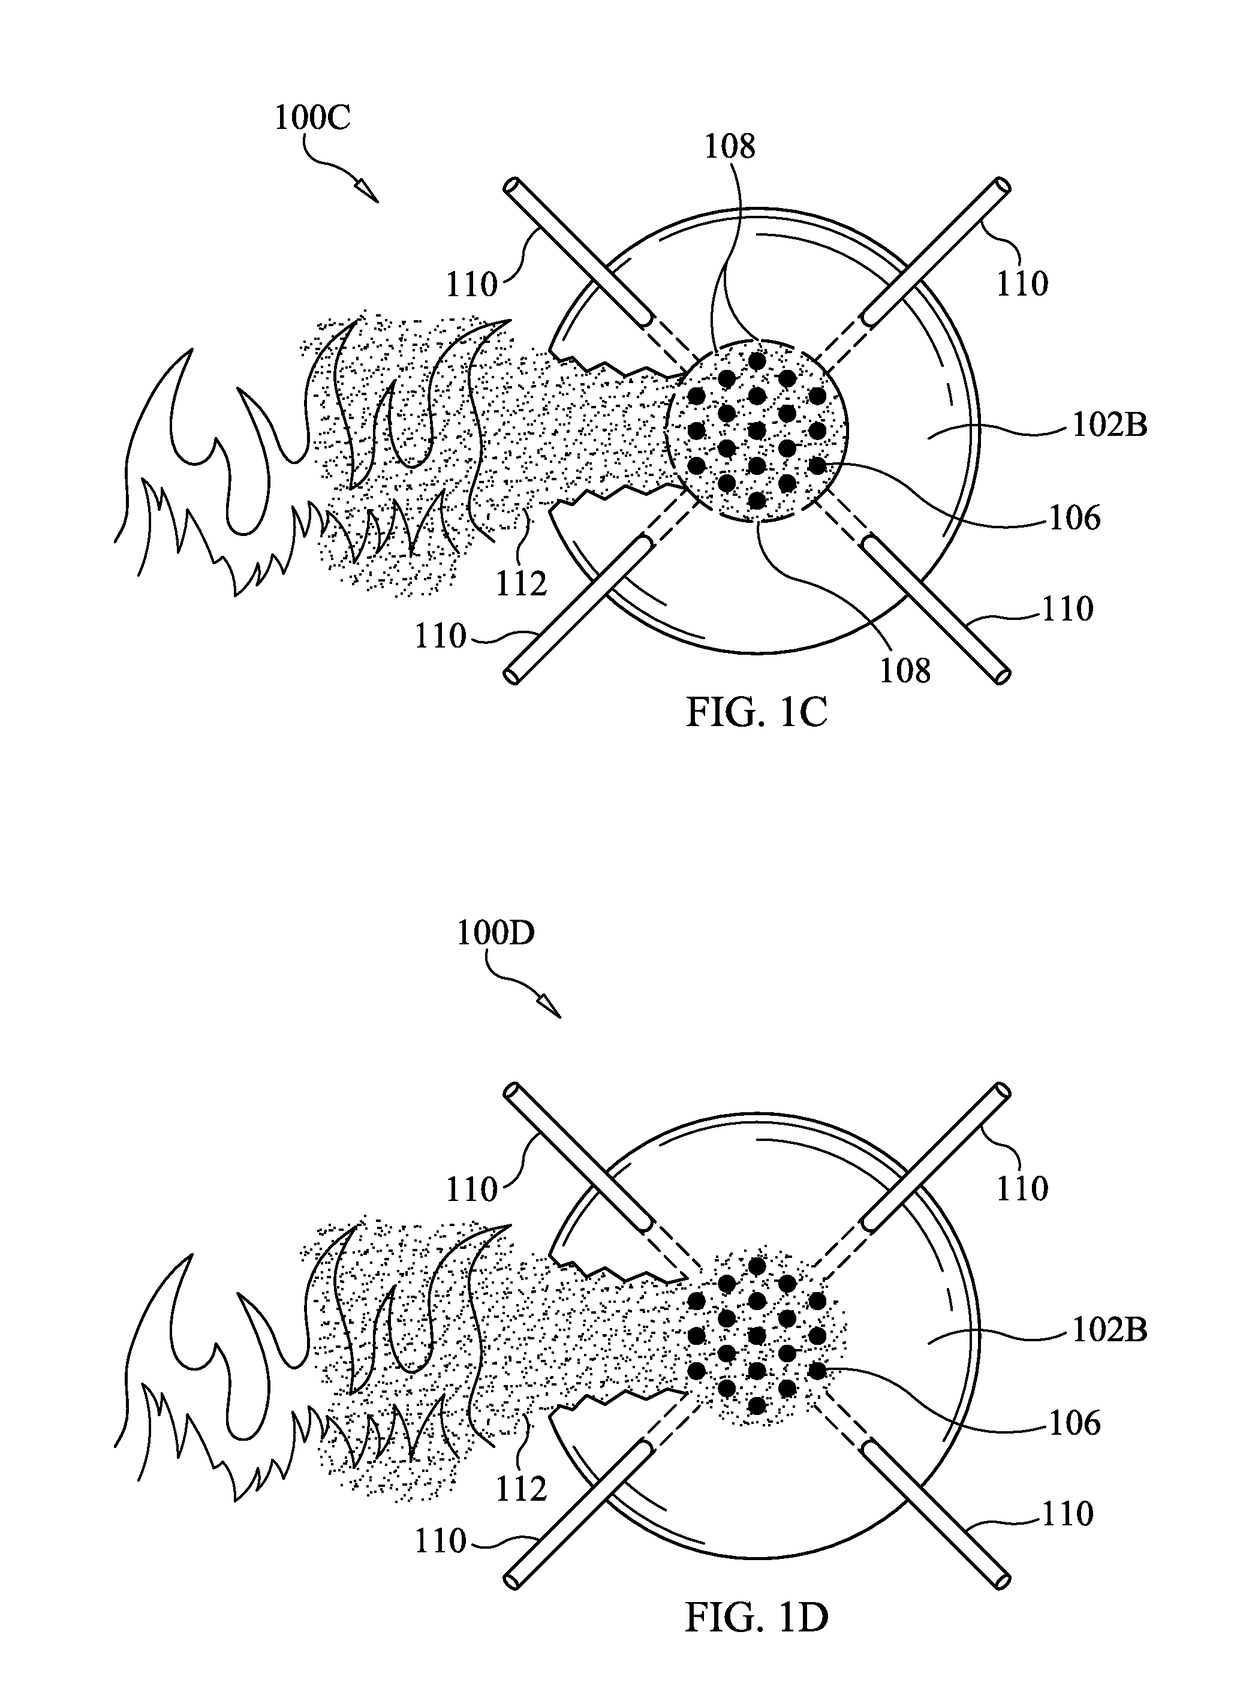 Fire suppression and/or extinguishment systems and devices